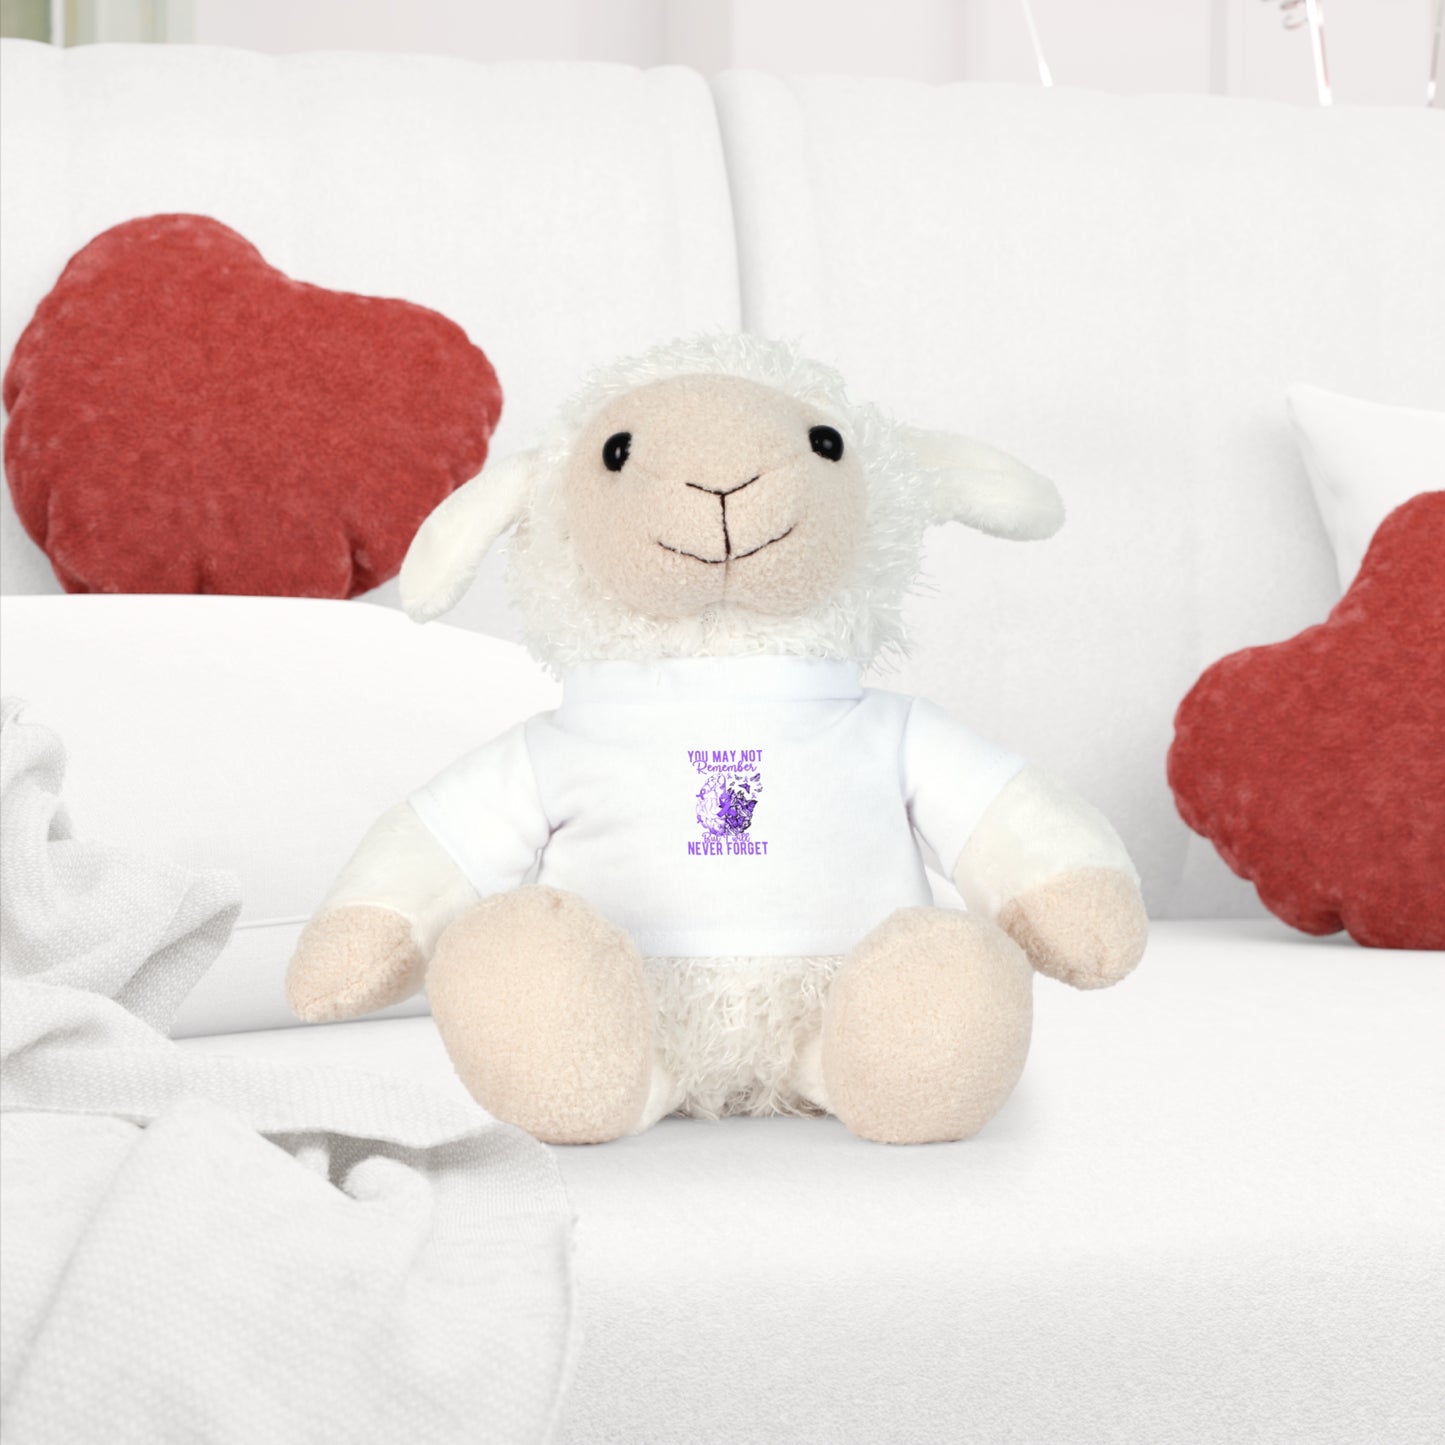 Alzheimer's Awareness - Plush Toy with T-Shirt